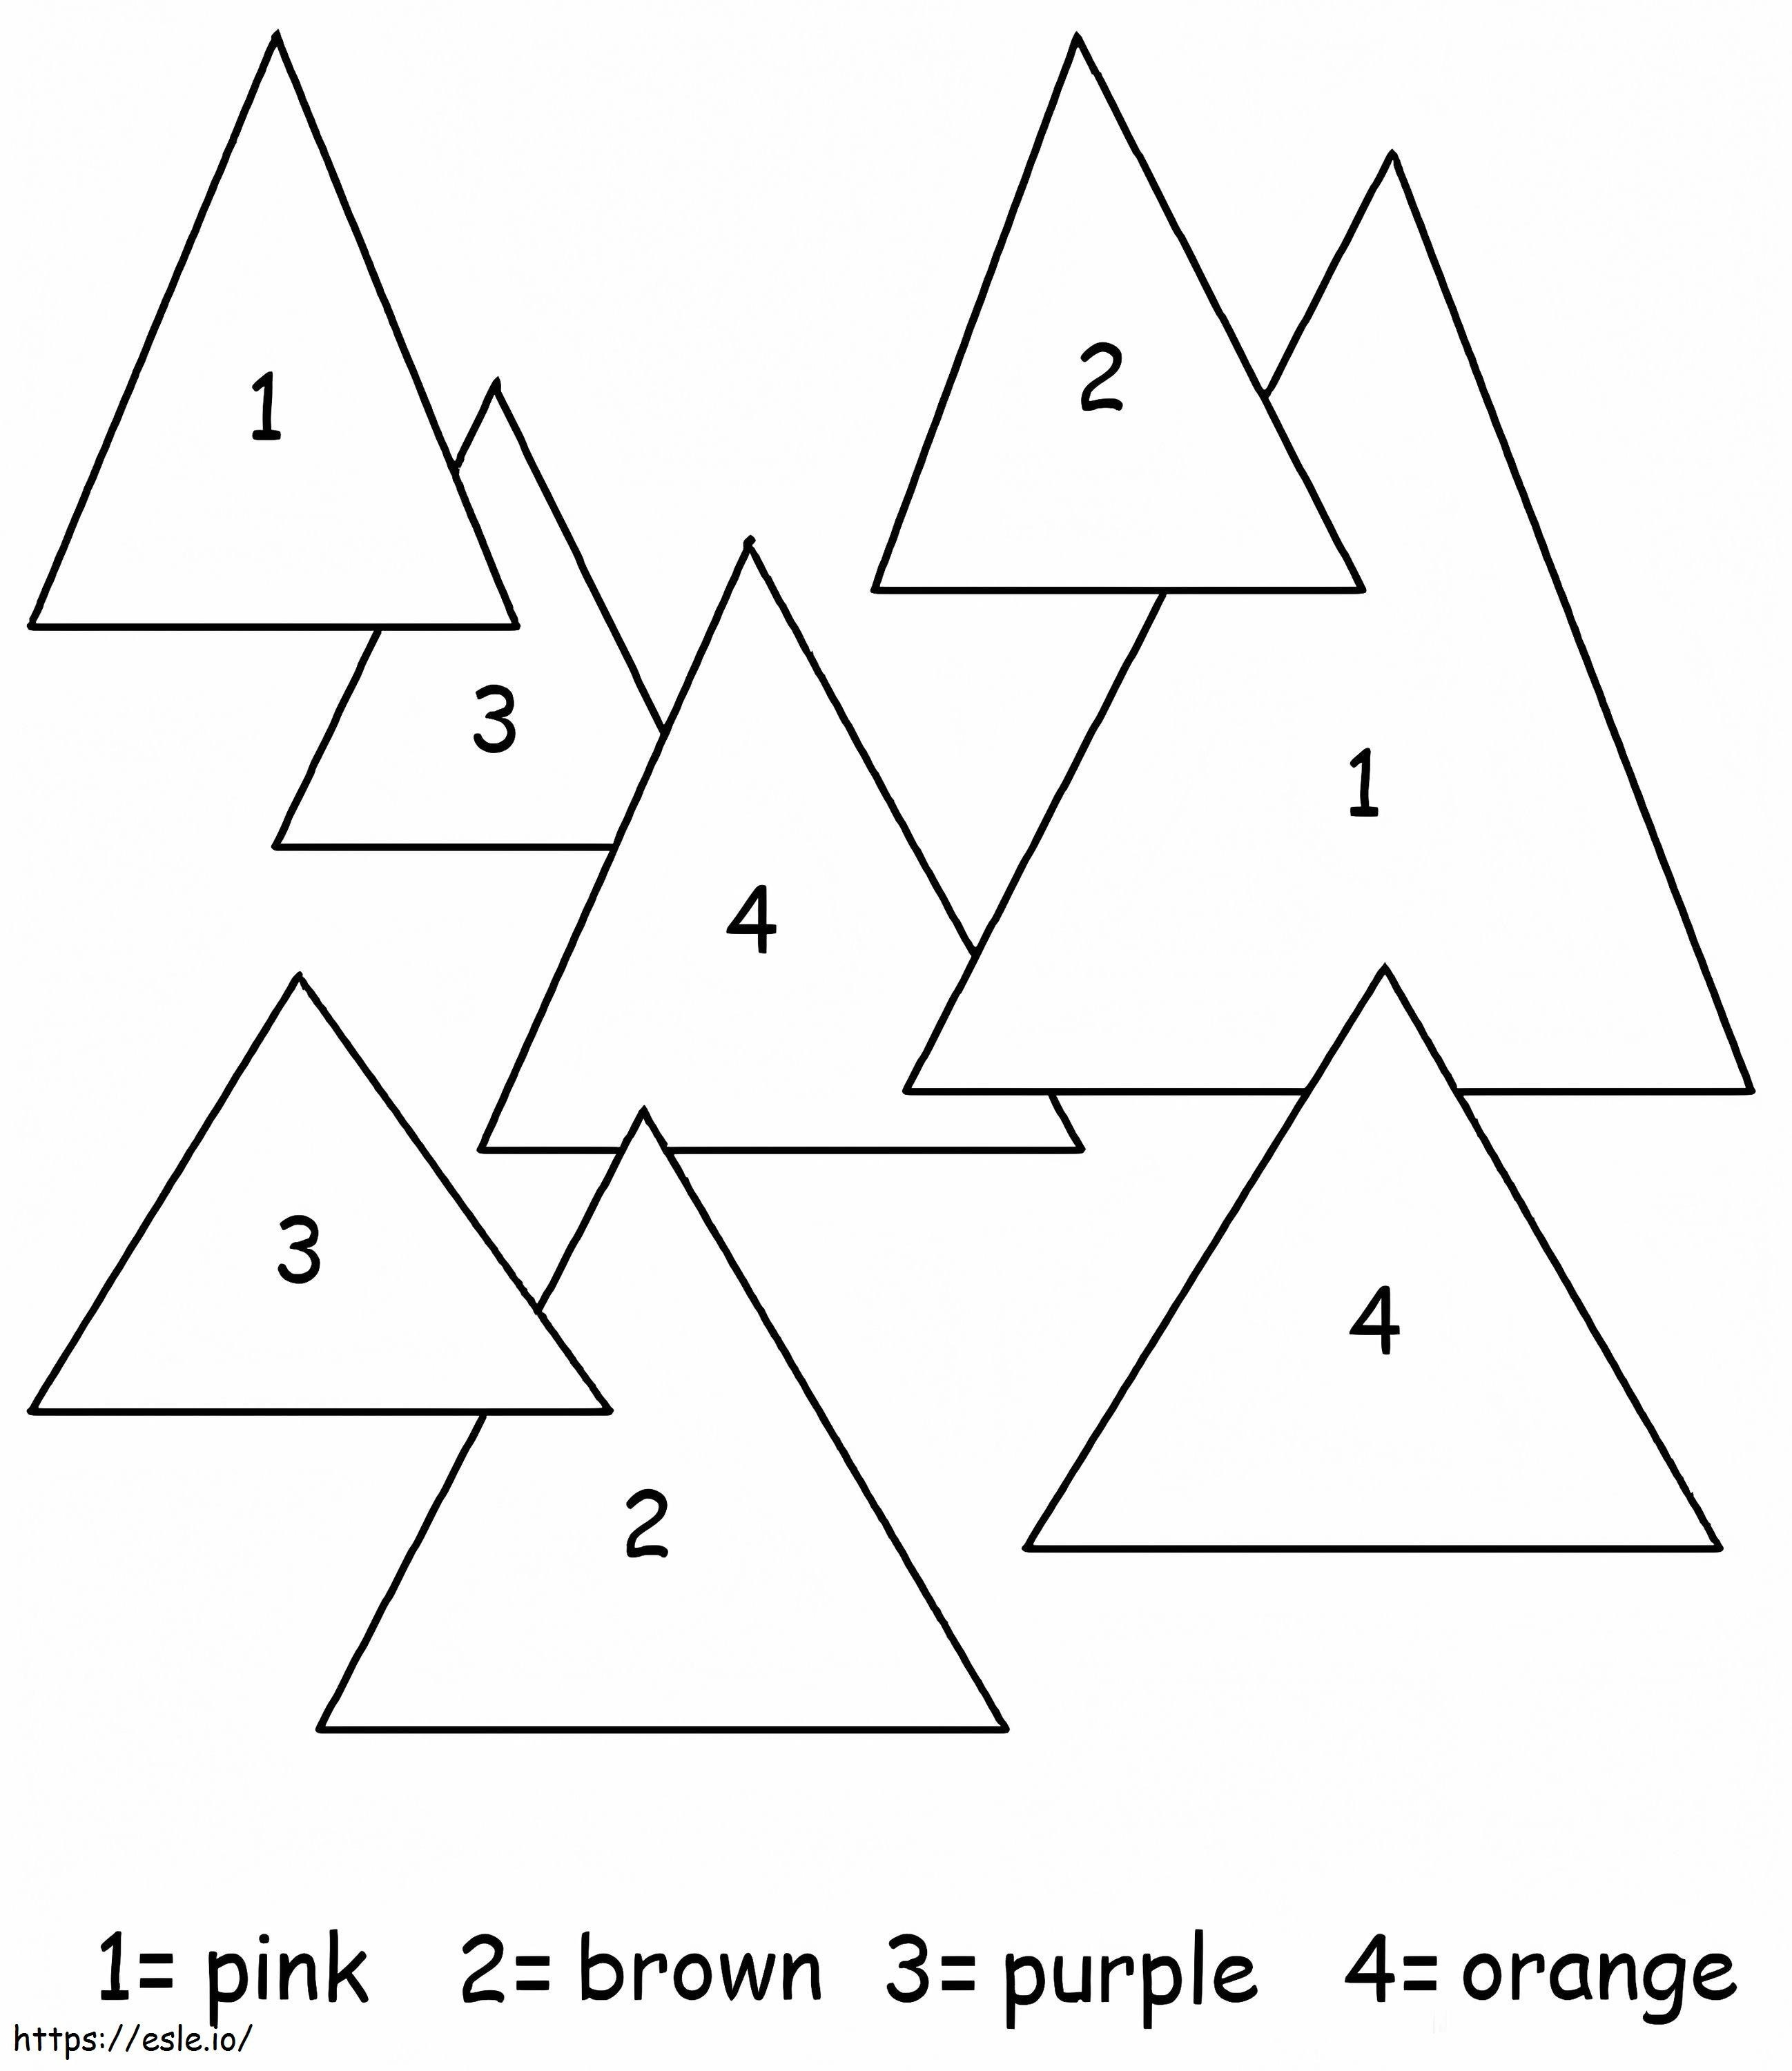 Easy Triangle Color By Number coloring page